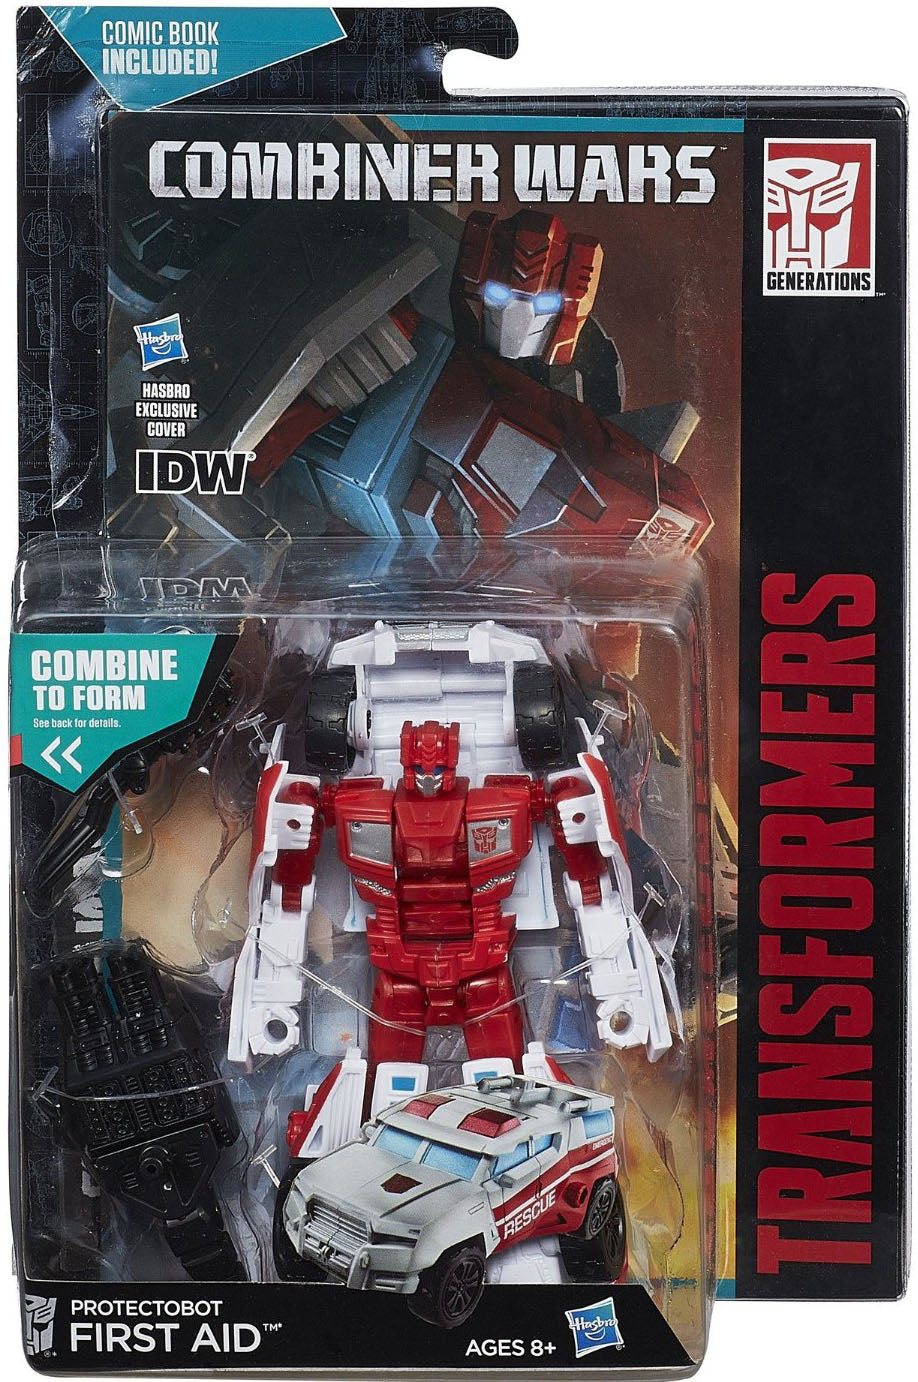 Transformers Generations Combiner Wars 6 Inch Figure Deluxe Class Wave 3 - First Aid (Sub-Standard Packaging)